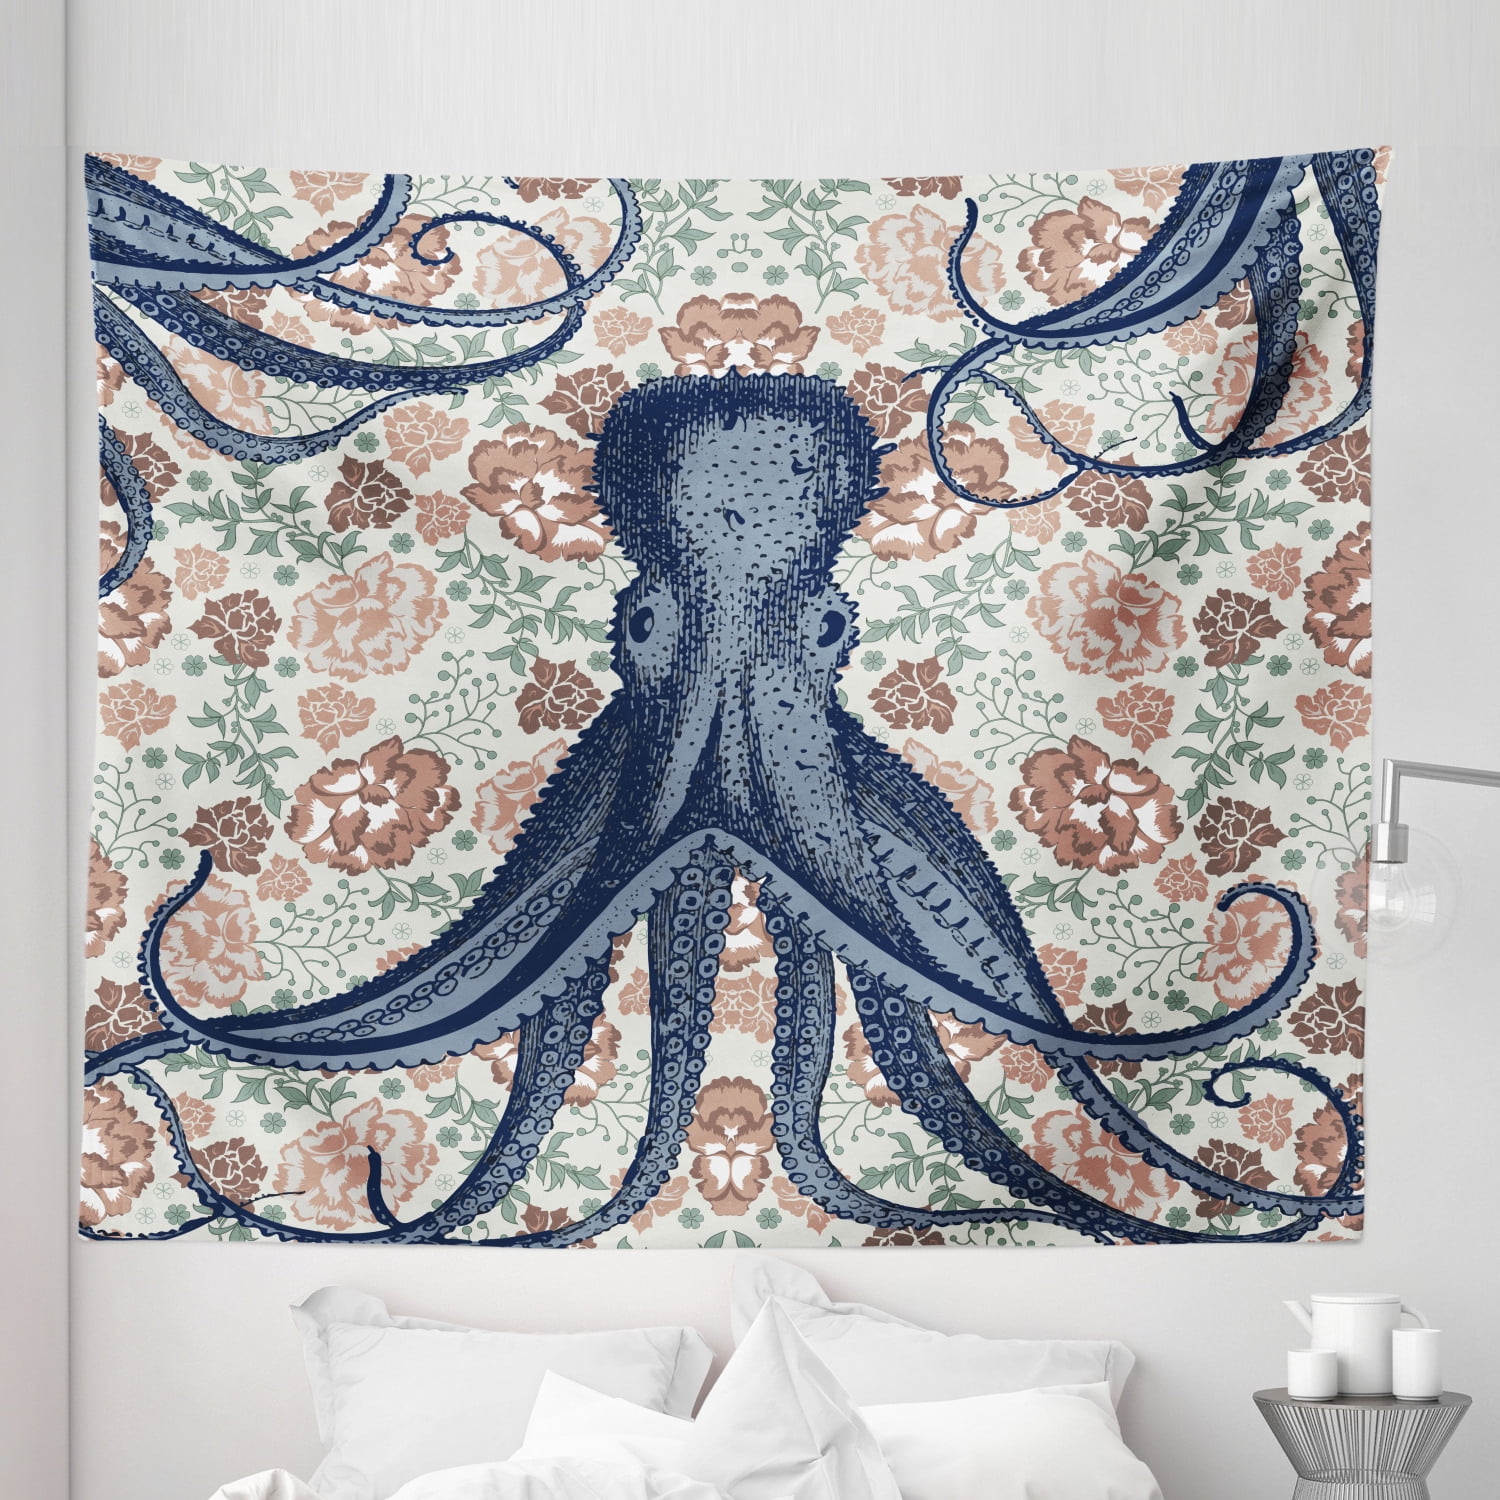 Abstract Octopus Tapestry Wall Hanging Decor for Bedroom Living Room Dorm